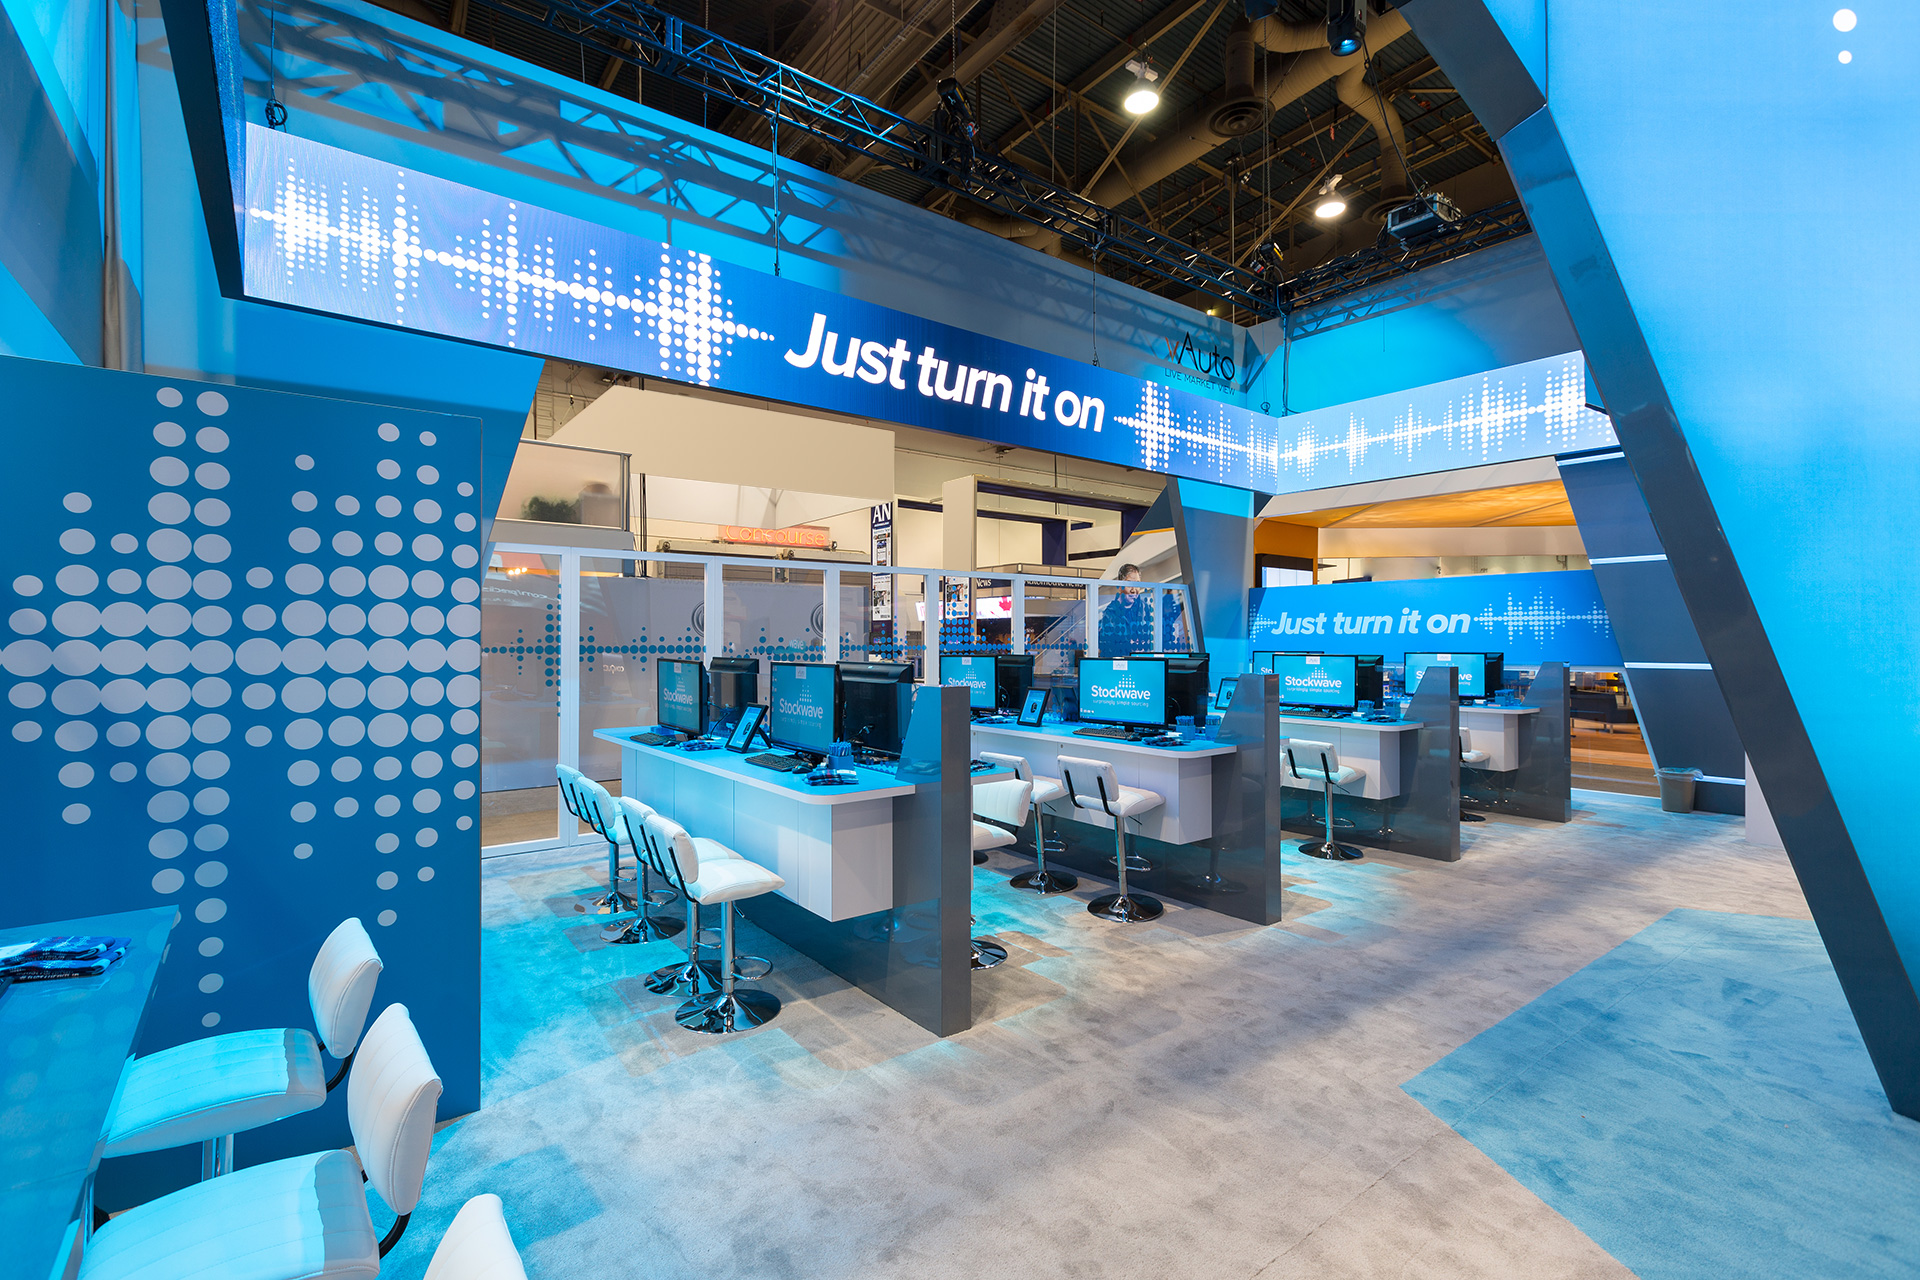 Four rows of white counters under blue lighting with white padded barstools and video monitors displaying a blue Stockwave logo beneath a thin video wall which surrounds the exhibit displaying the text "just turn it on".